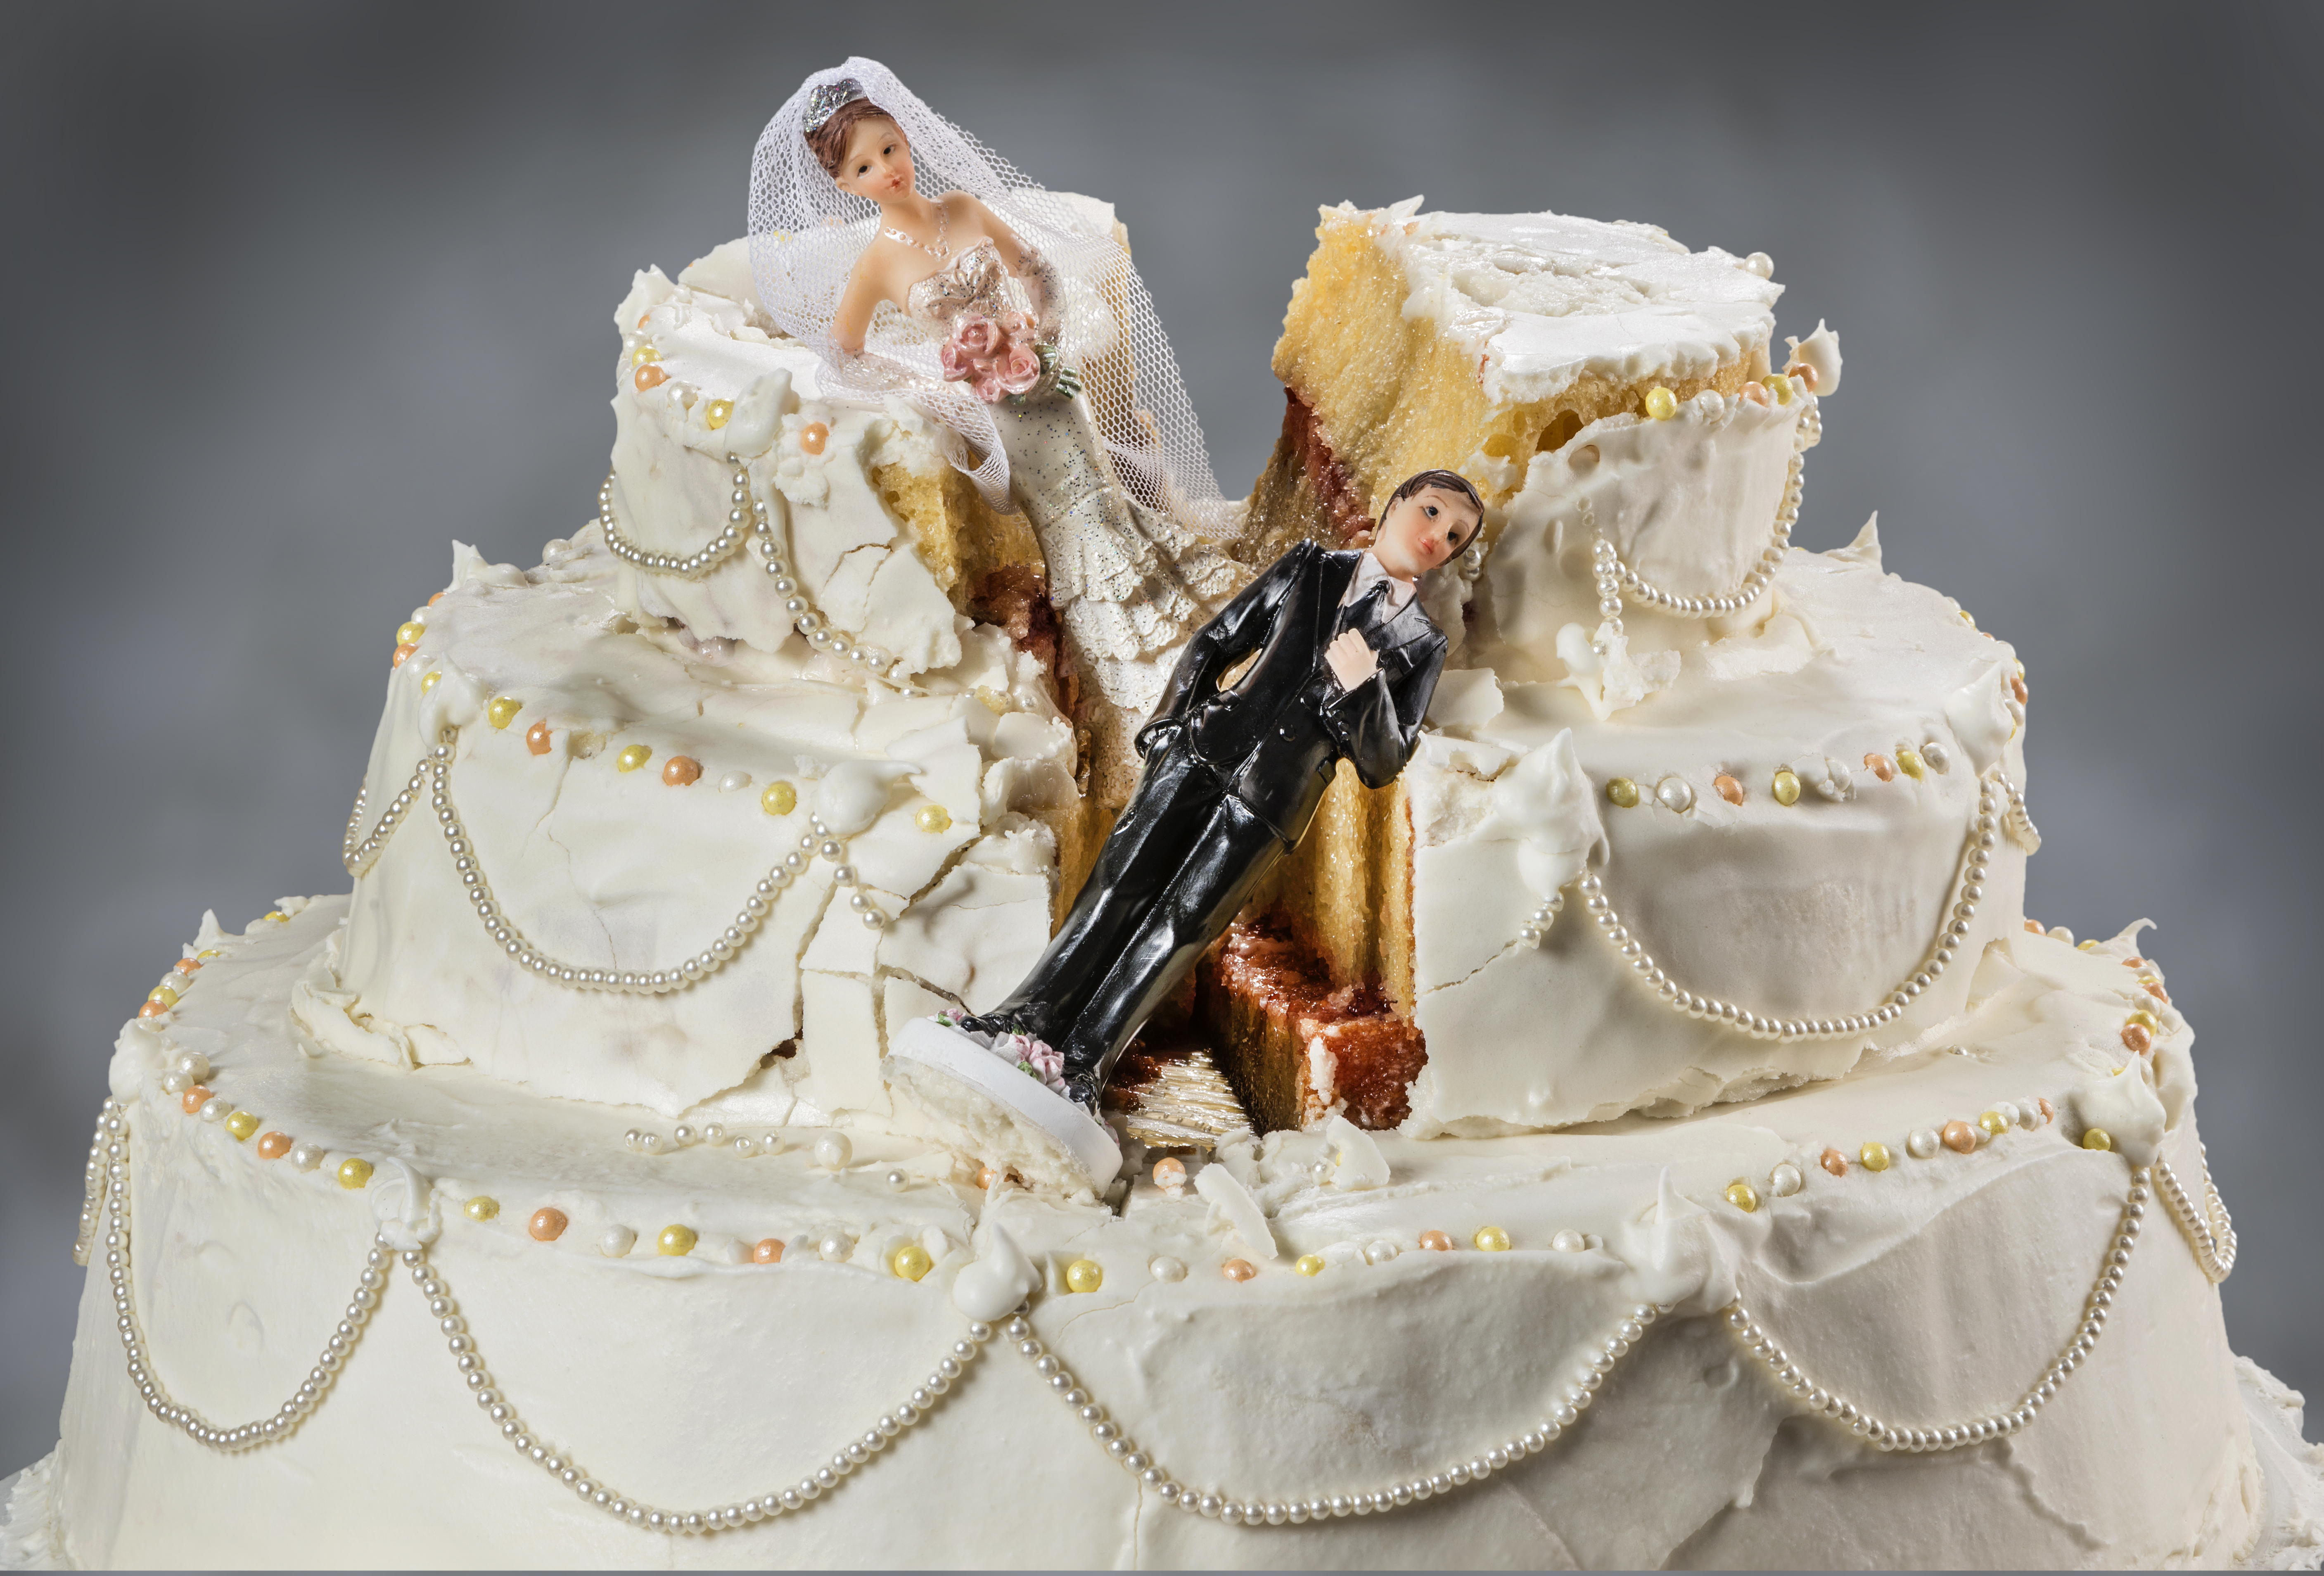 An image of a ruined wedding cake | Source: Shutterstock